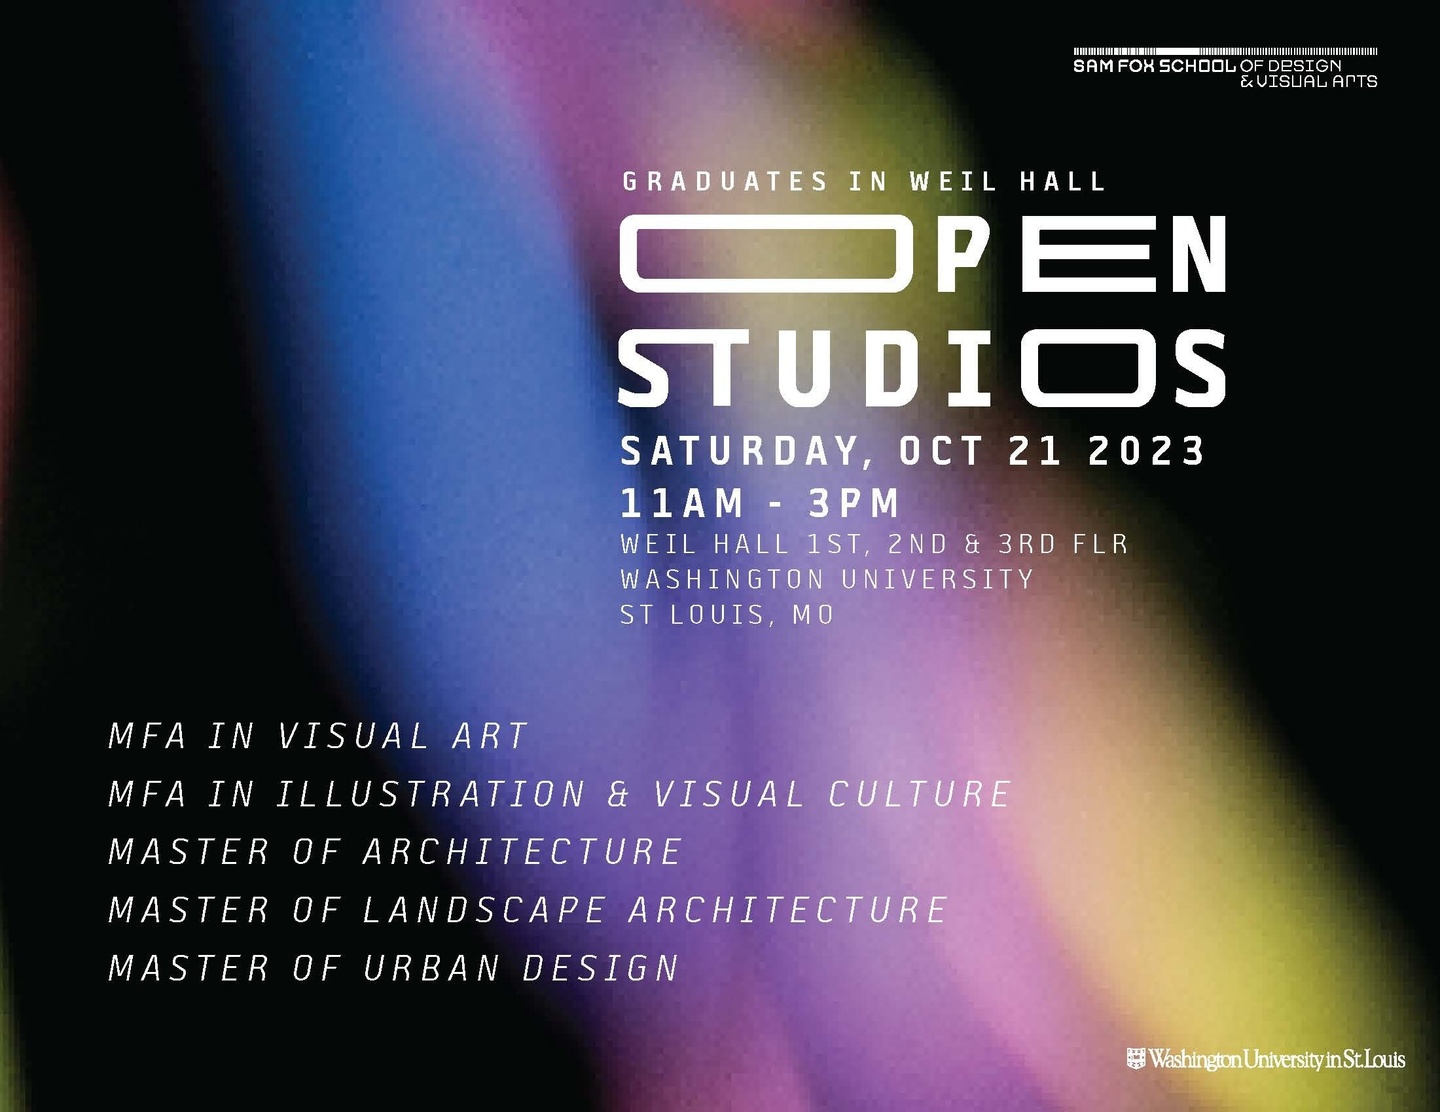 flyer with black background with blue, purple, yellow colors going vertically in the center with text on top that says Graduates in Weil Hall Open Studios